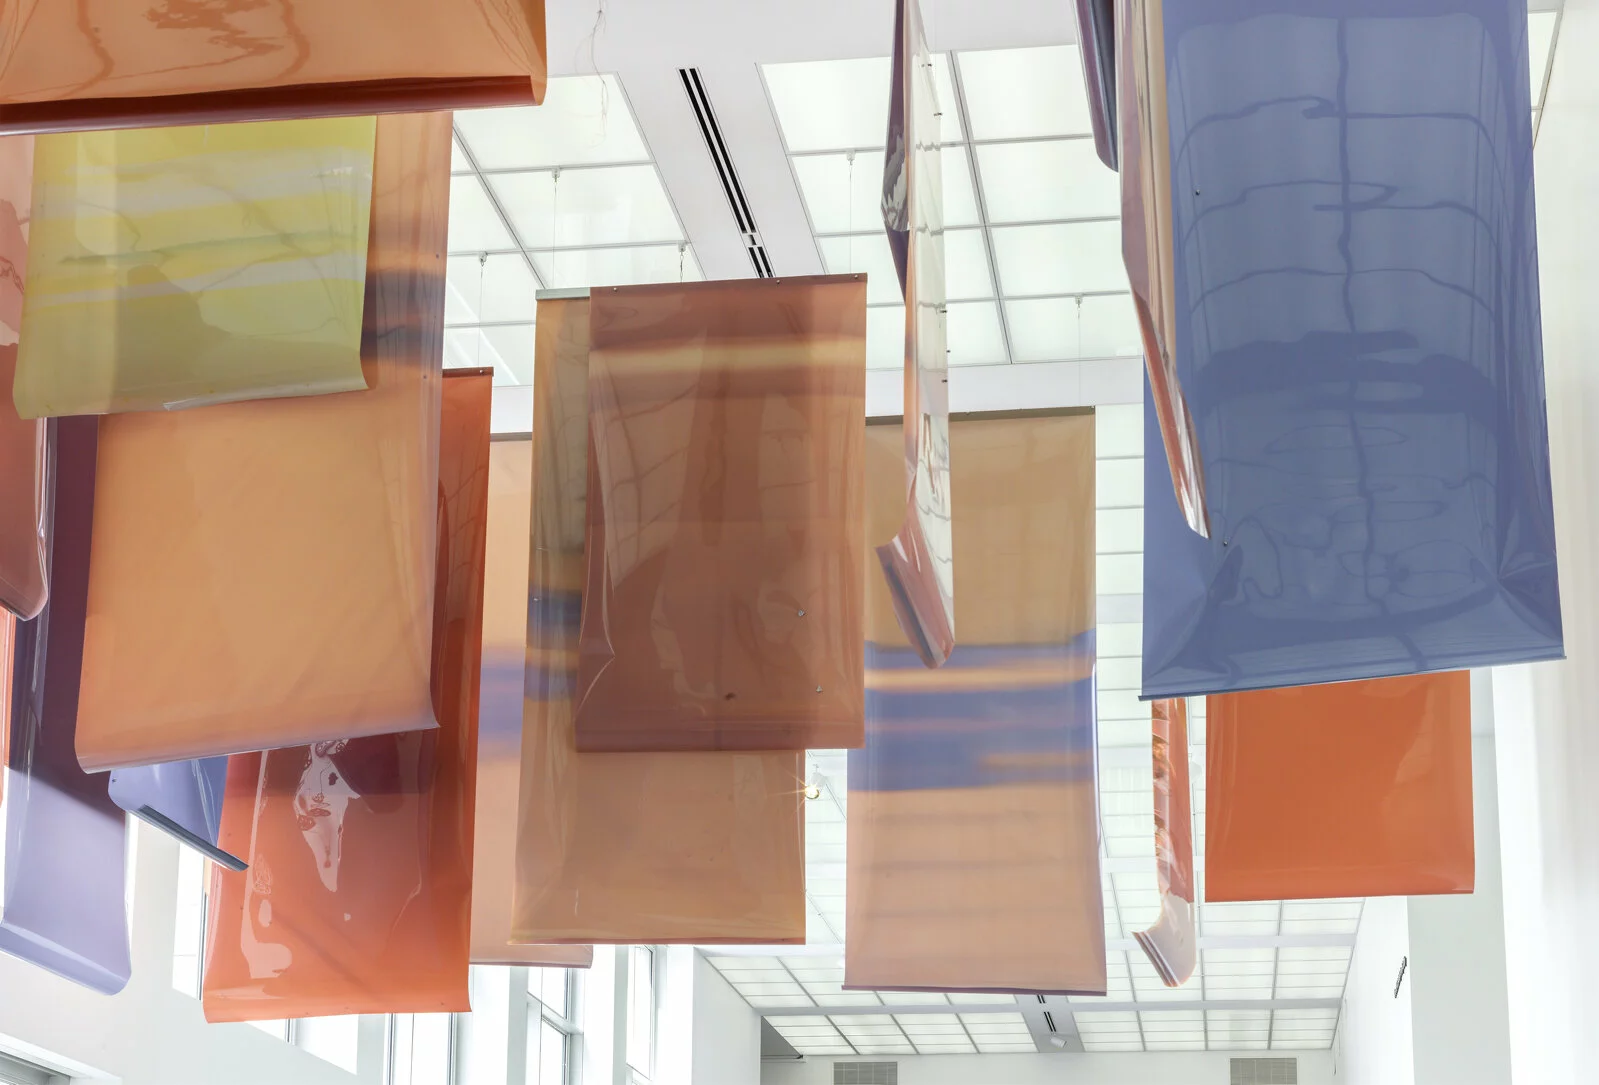 Large pieces of blue, orange, peach, and yellow plastic hang from the ceiling of a large, white space.